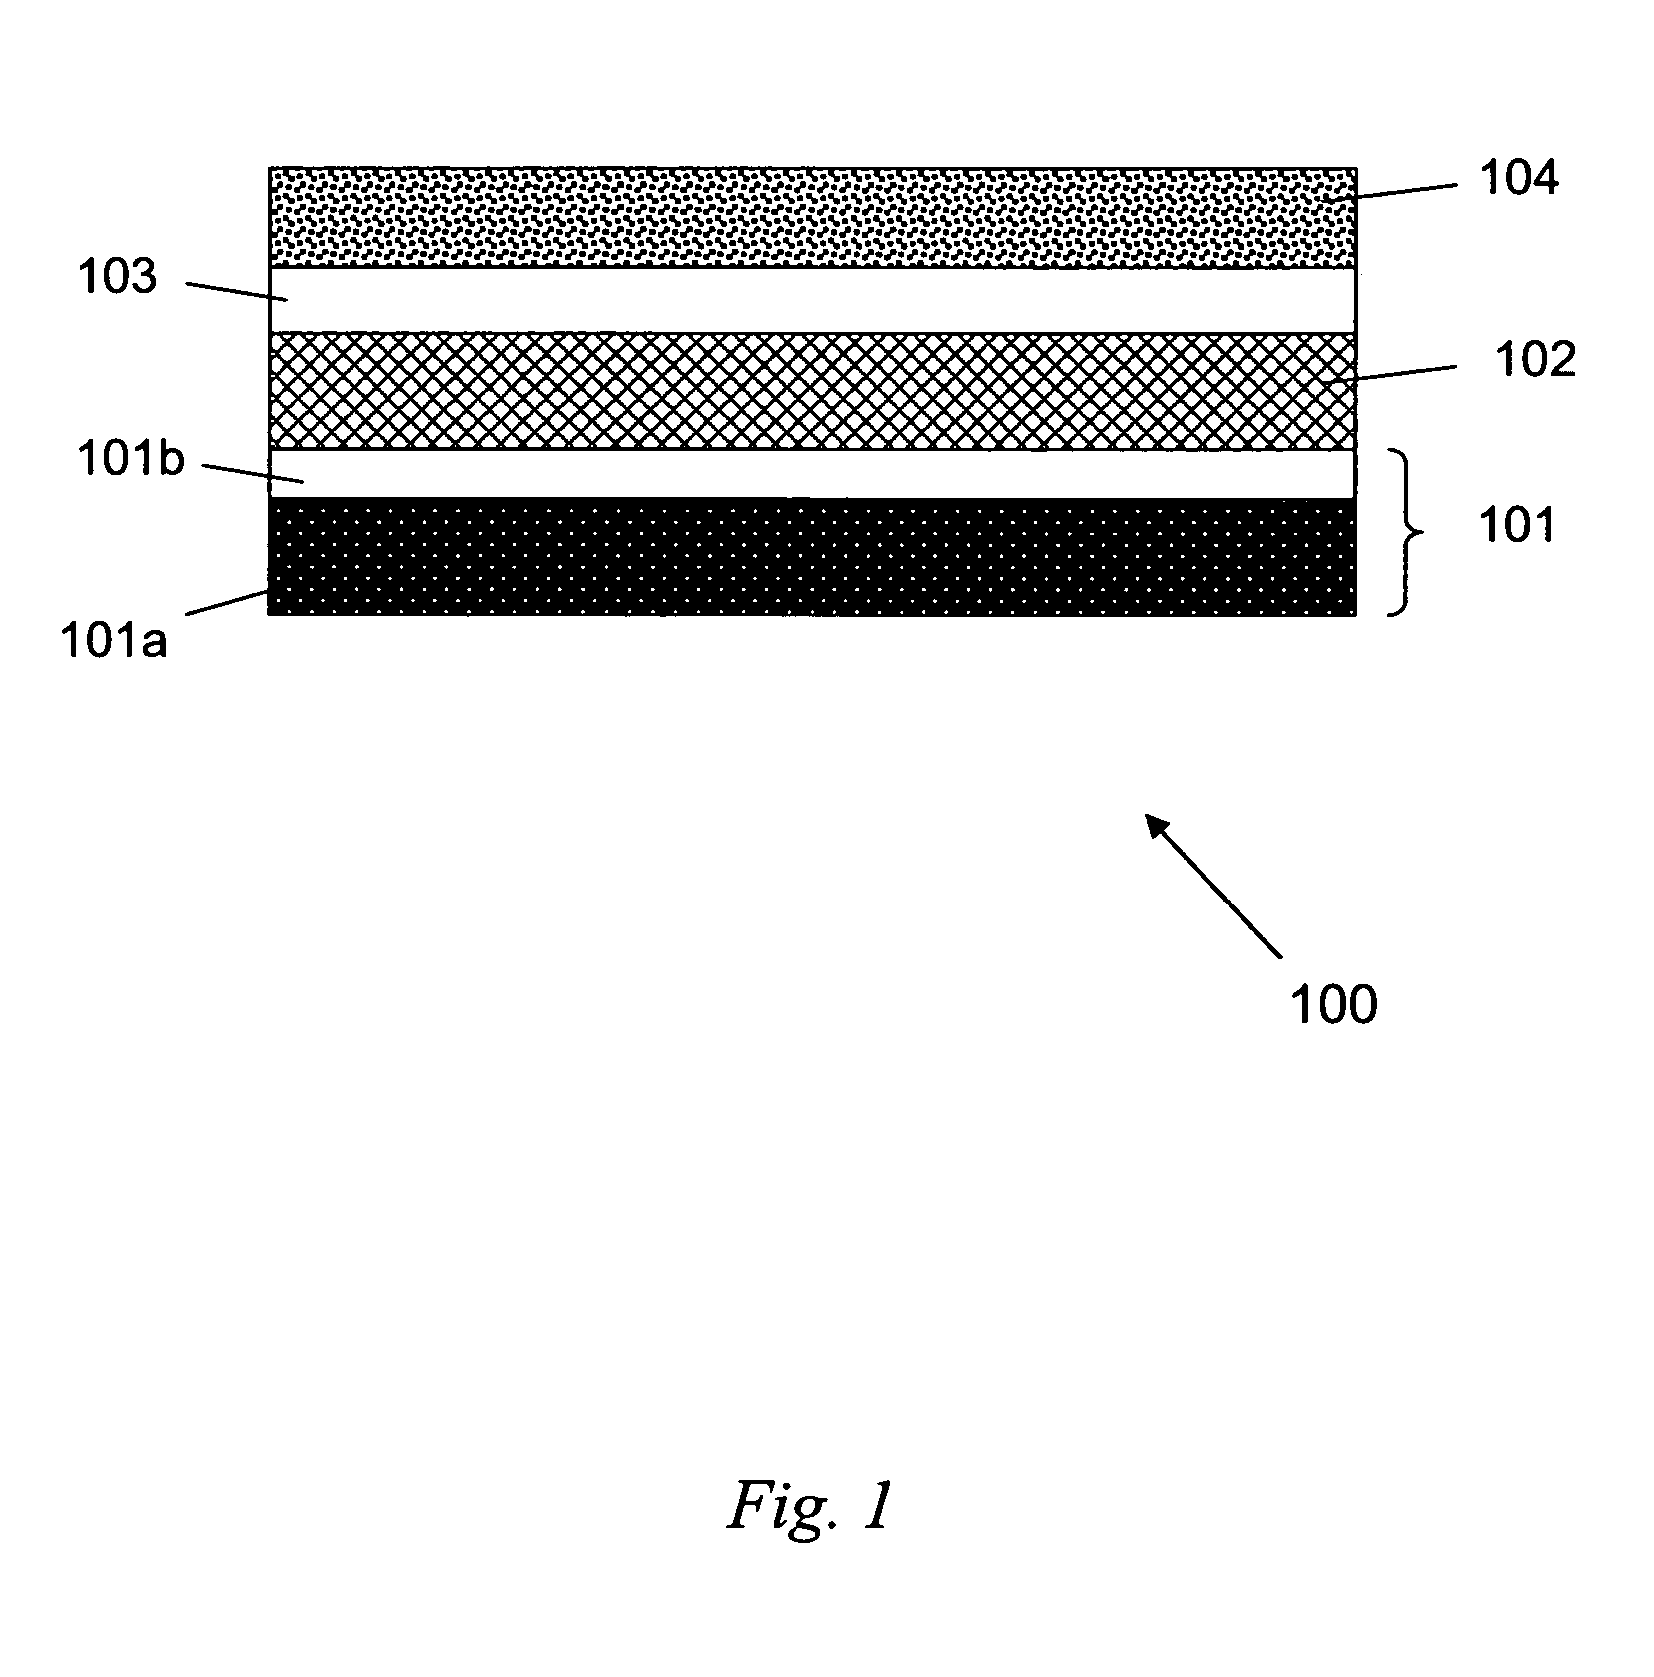 Anodized aluminum oxide nanoporous template and associated method of fabrication